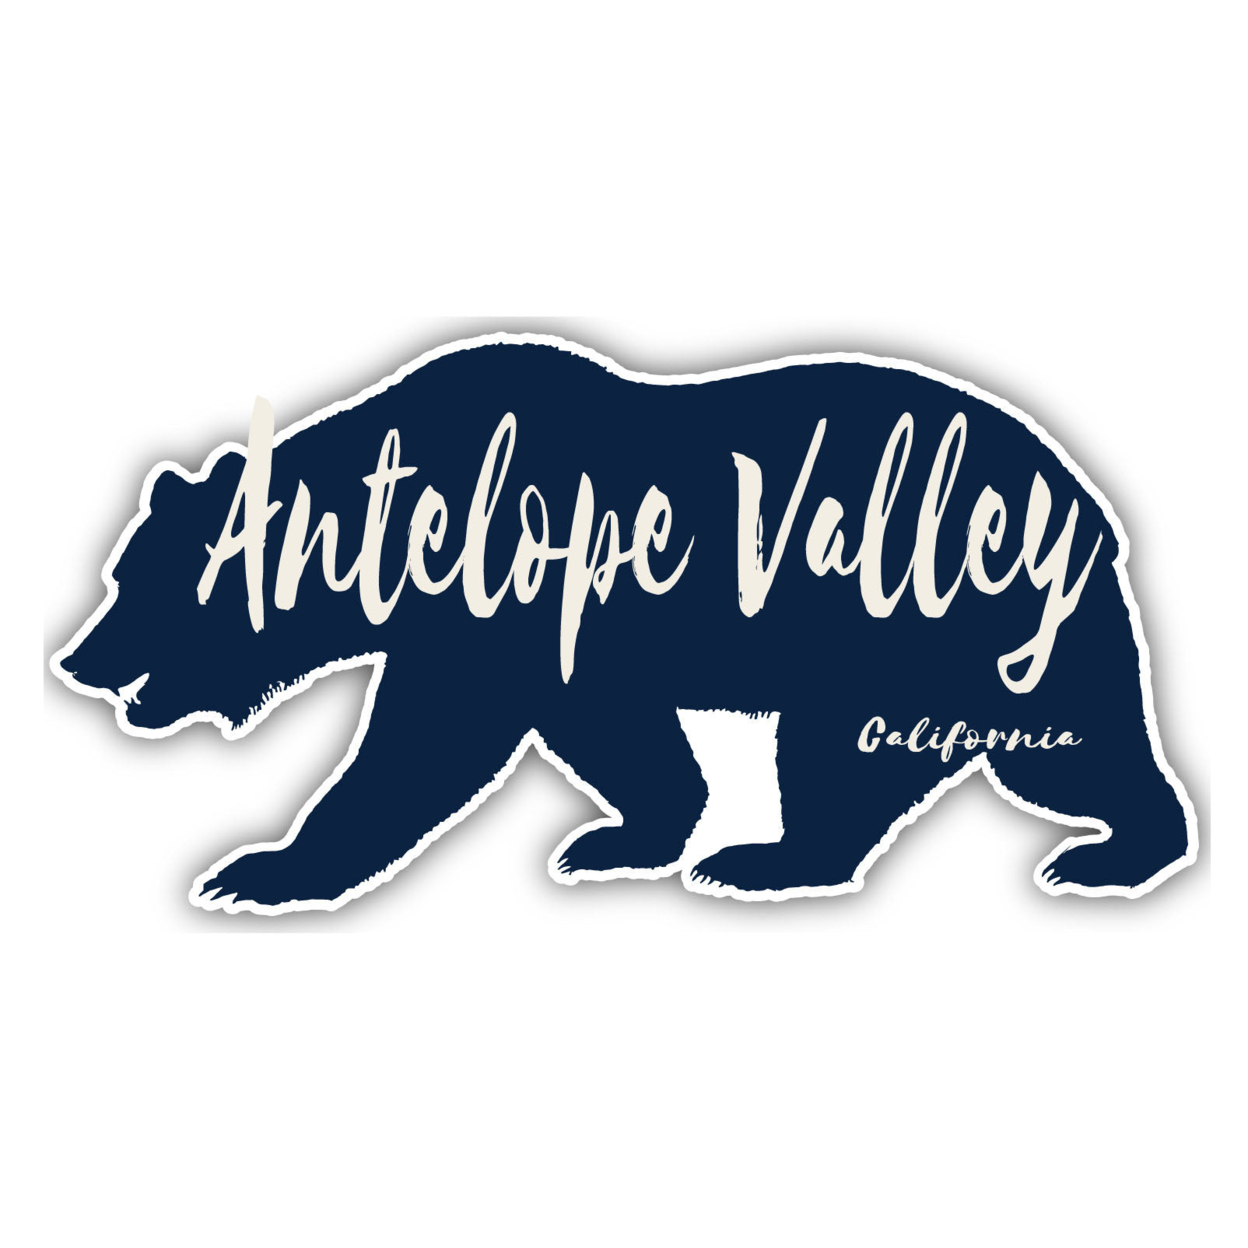 Antelope Valley California Souvenir Decorative Stickers (Choose Theme And Size) - Single Unit, 6-Inch, Bear